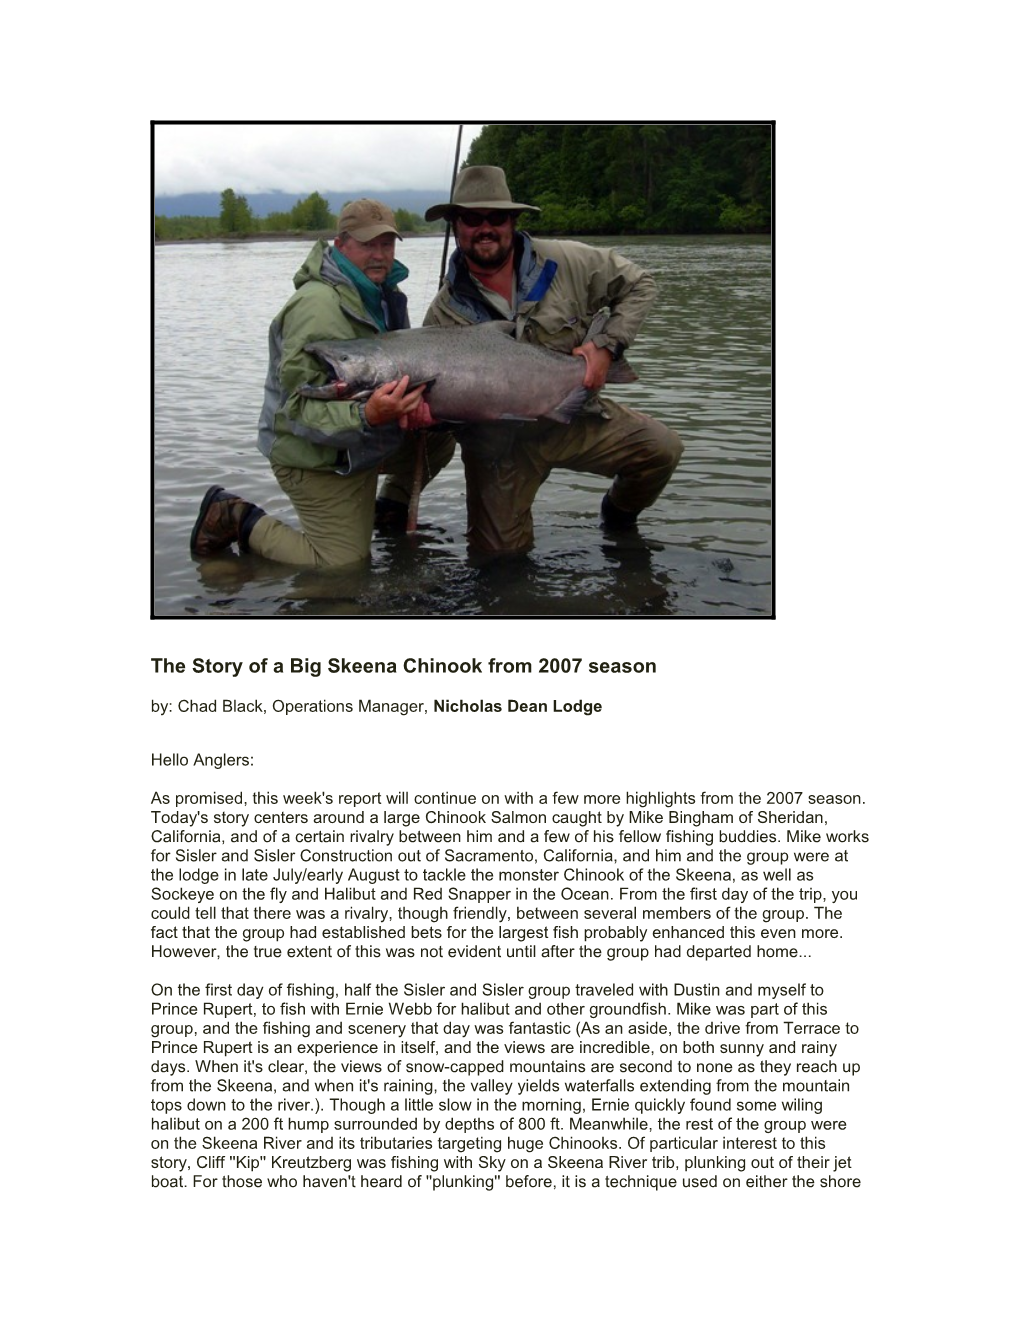 The Story of a Big Skeena Chinook from 2007 Season